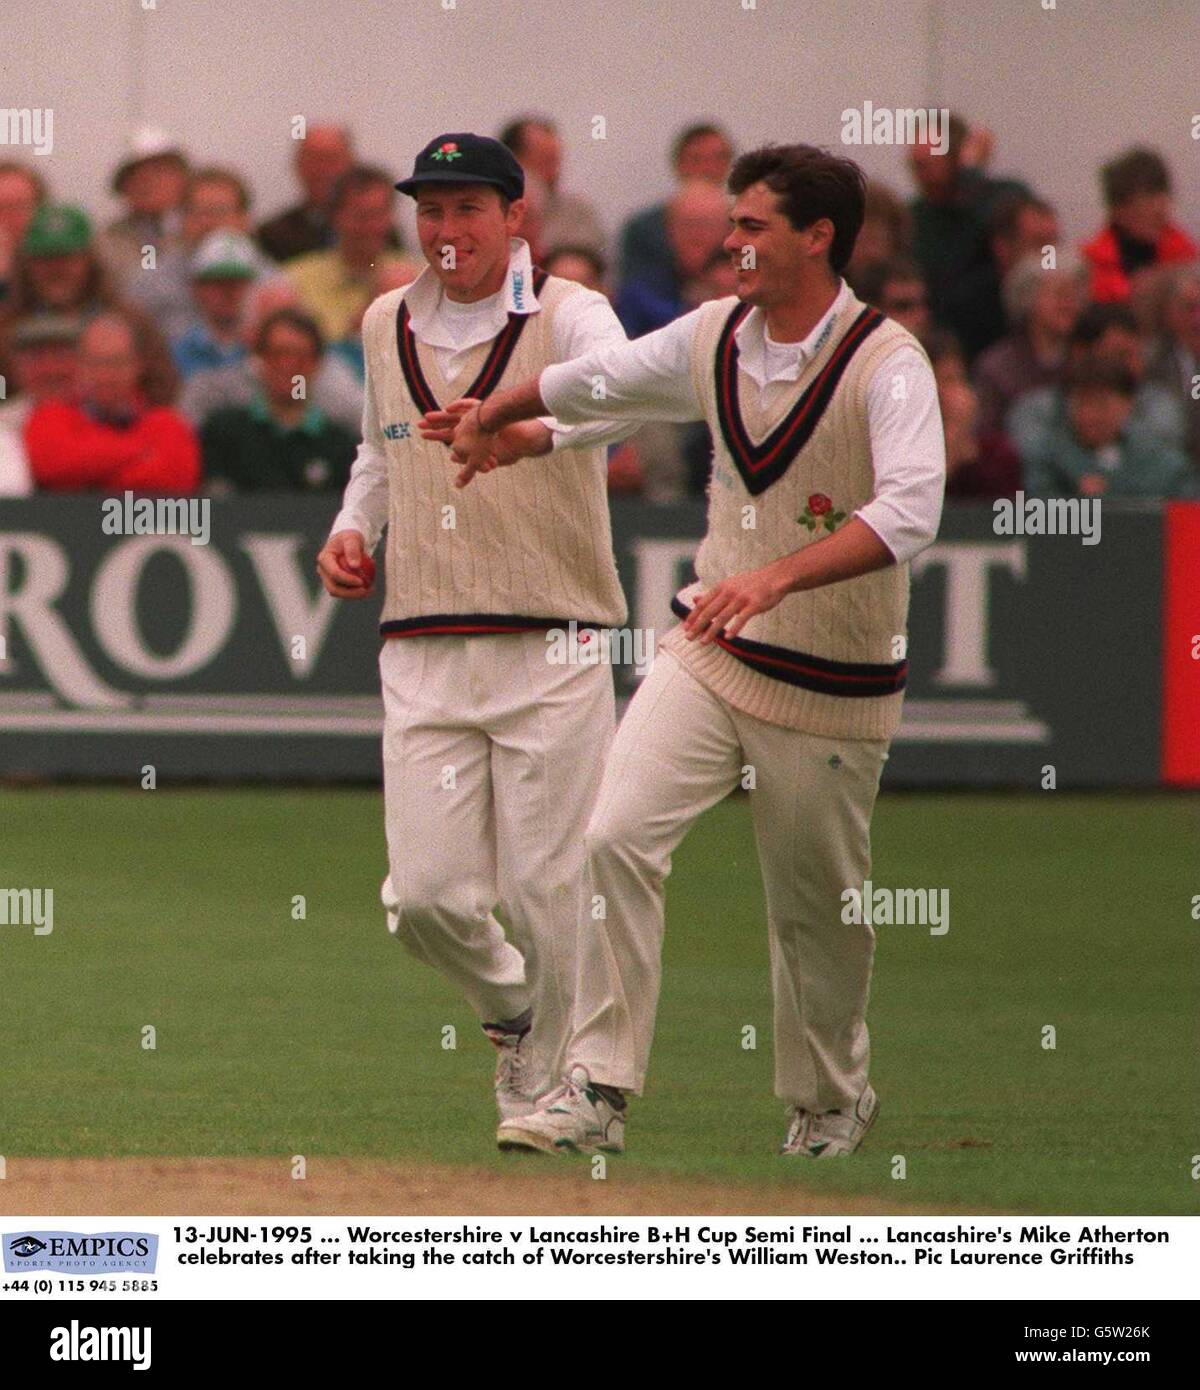 13-JUN-1995, Worcestershire v Lancashire B+H Cup Semi Final, Lancashire's Mike Atherton celebrates after taking the catch of Worcestershire's William Weston Stock Photo